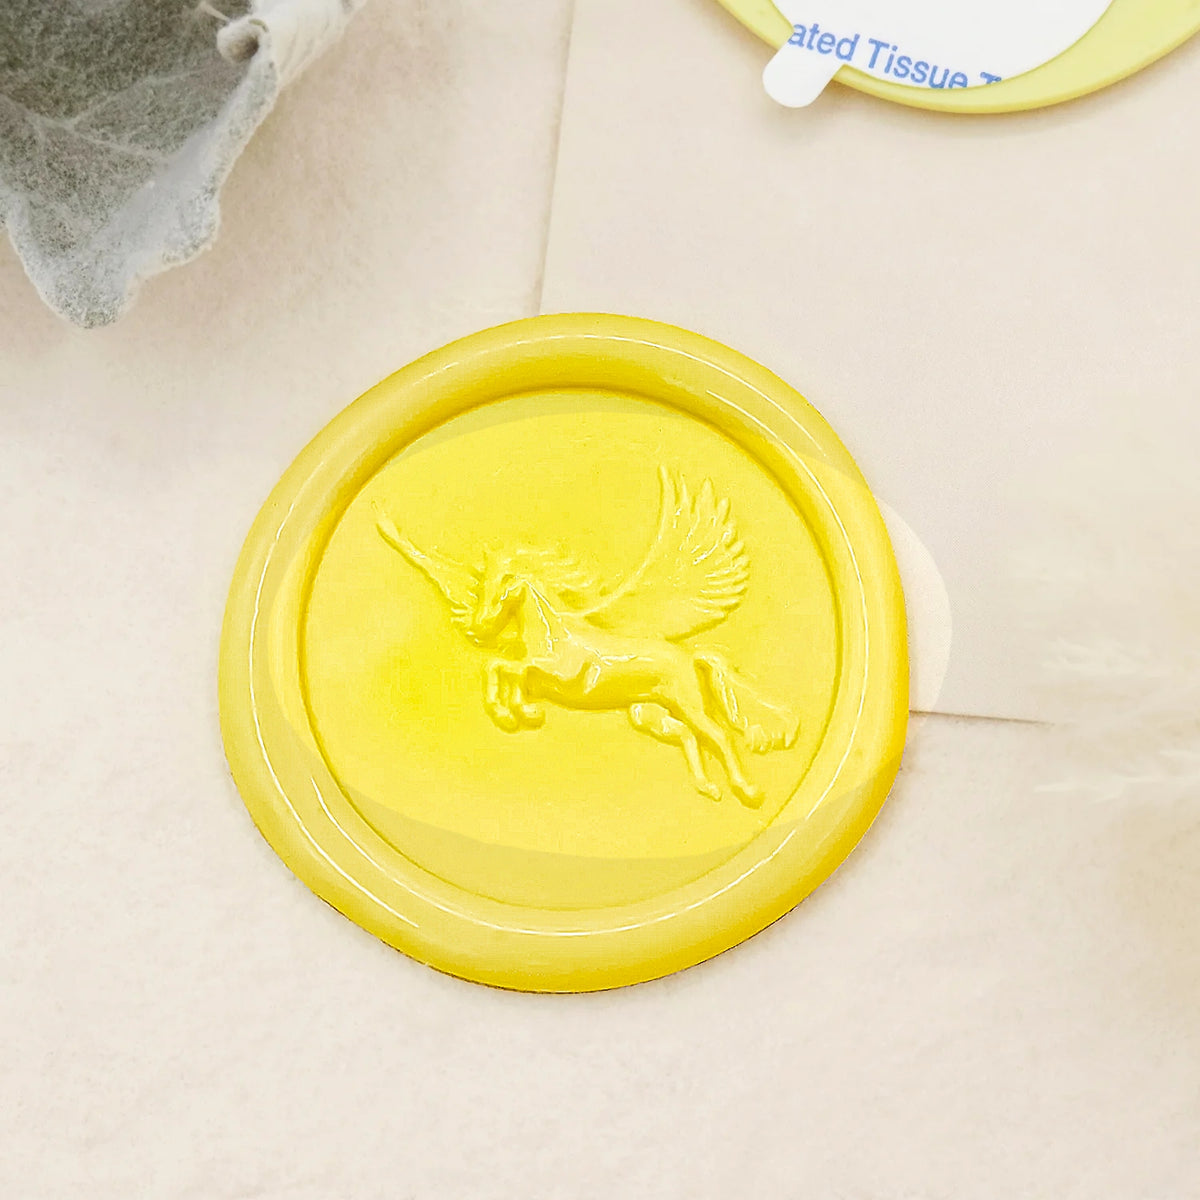 3D Relief Pegasus Self-adhesive Wax Seal Stickers 4-4